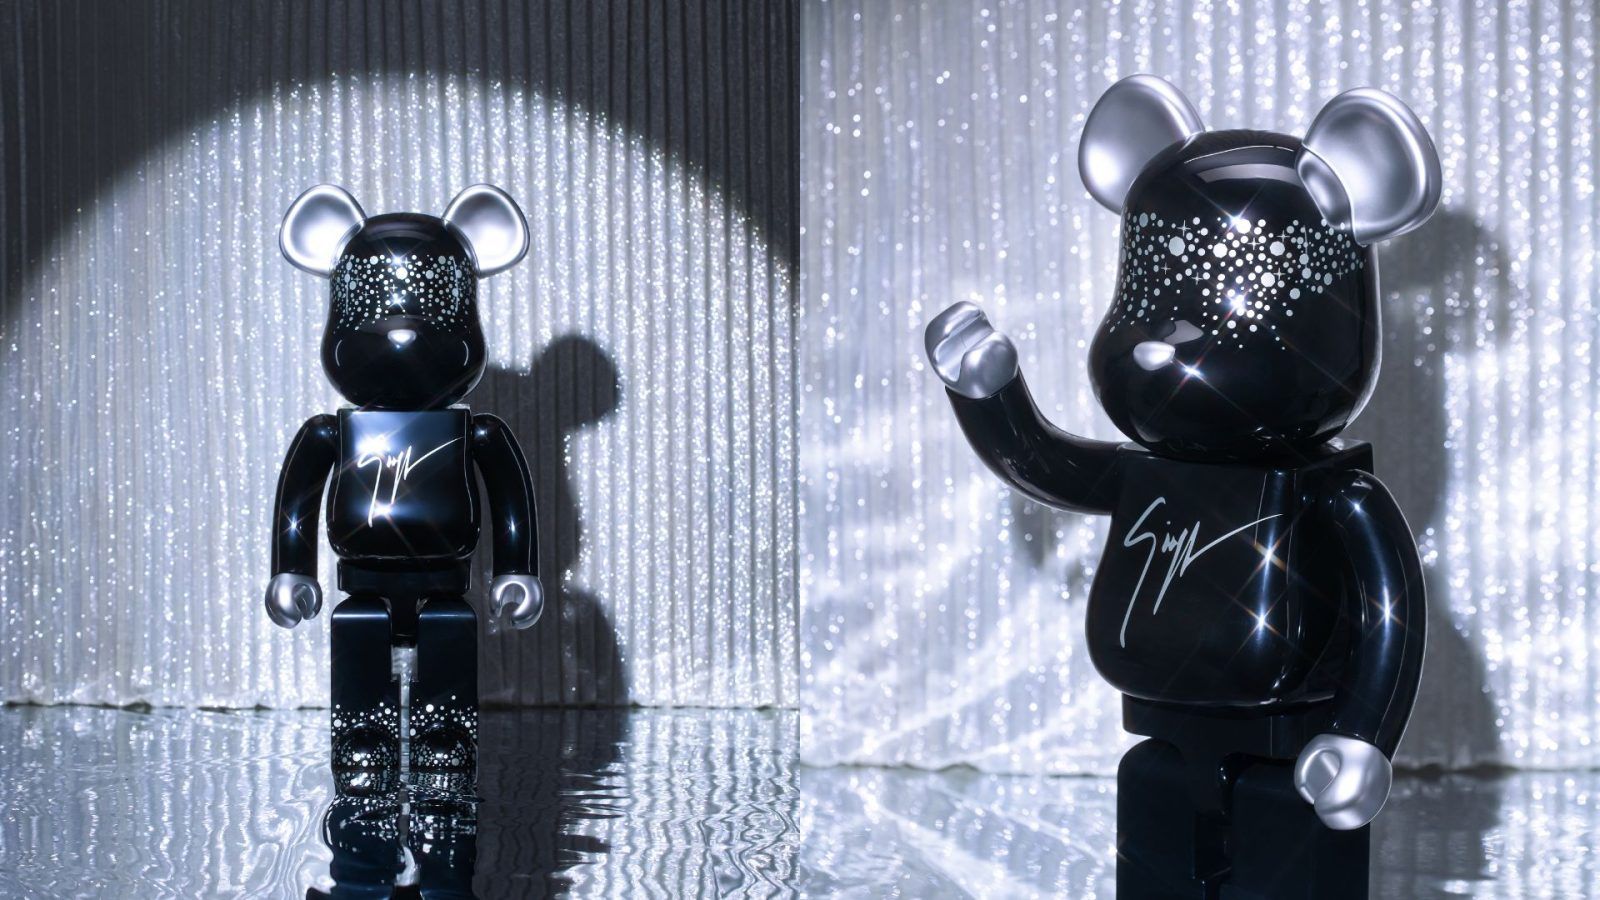 Bearbrick History: The Story Behind Iconic Collectibles